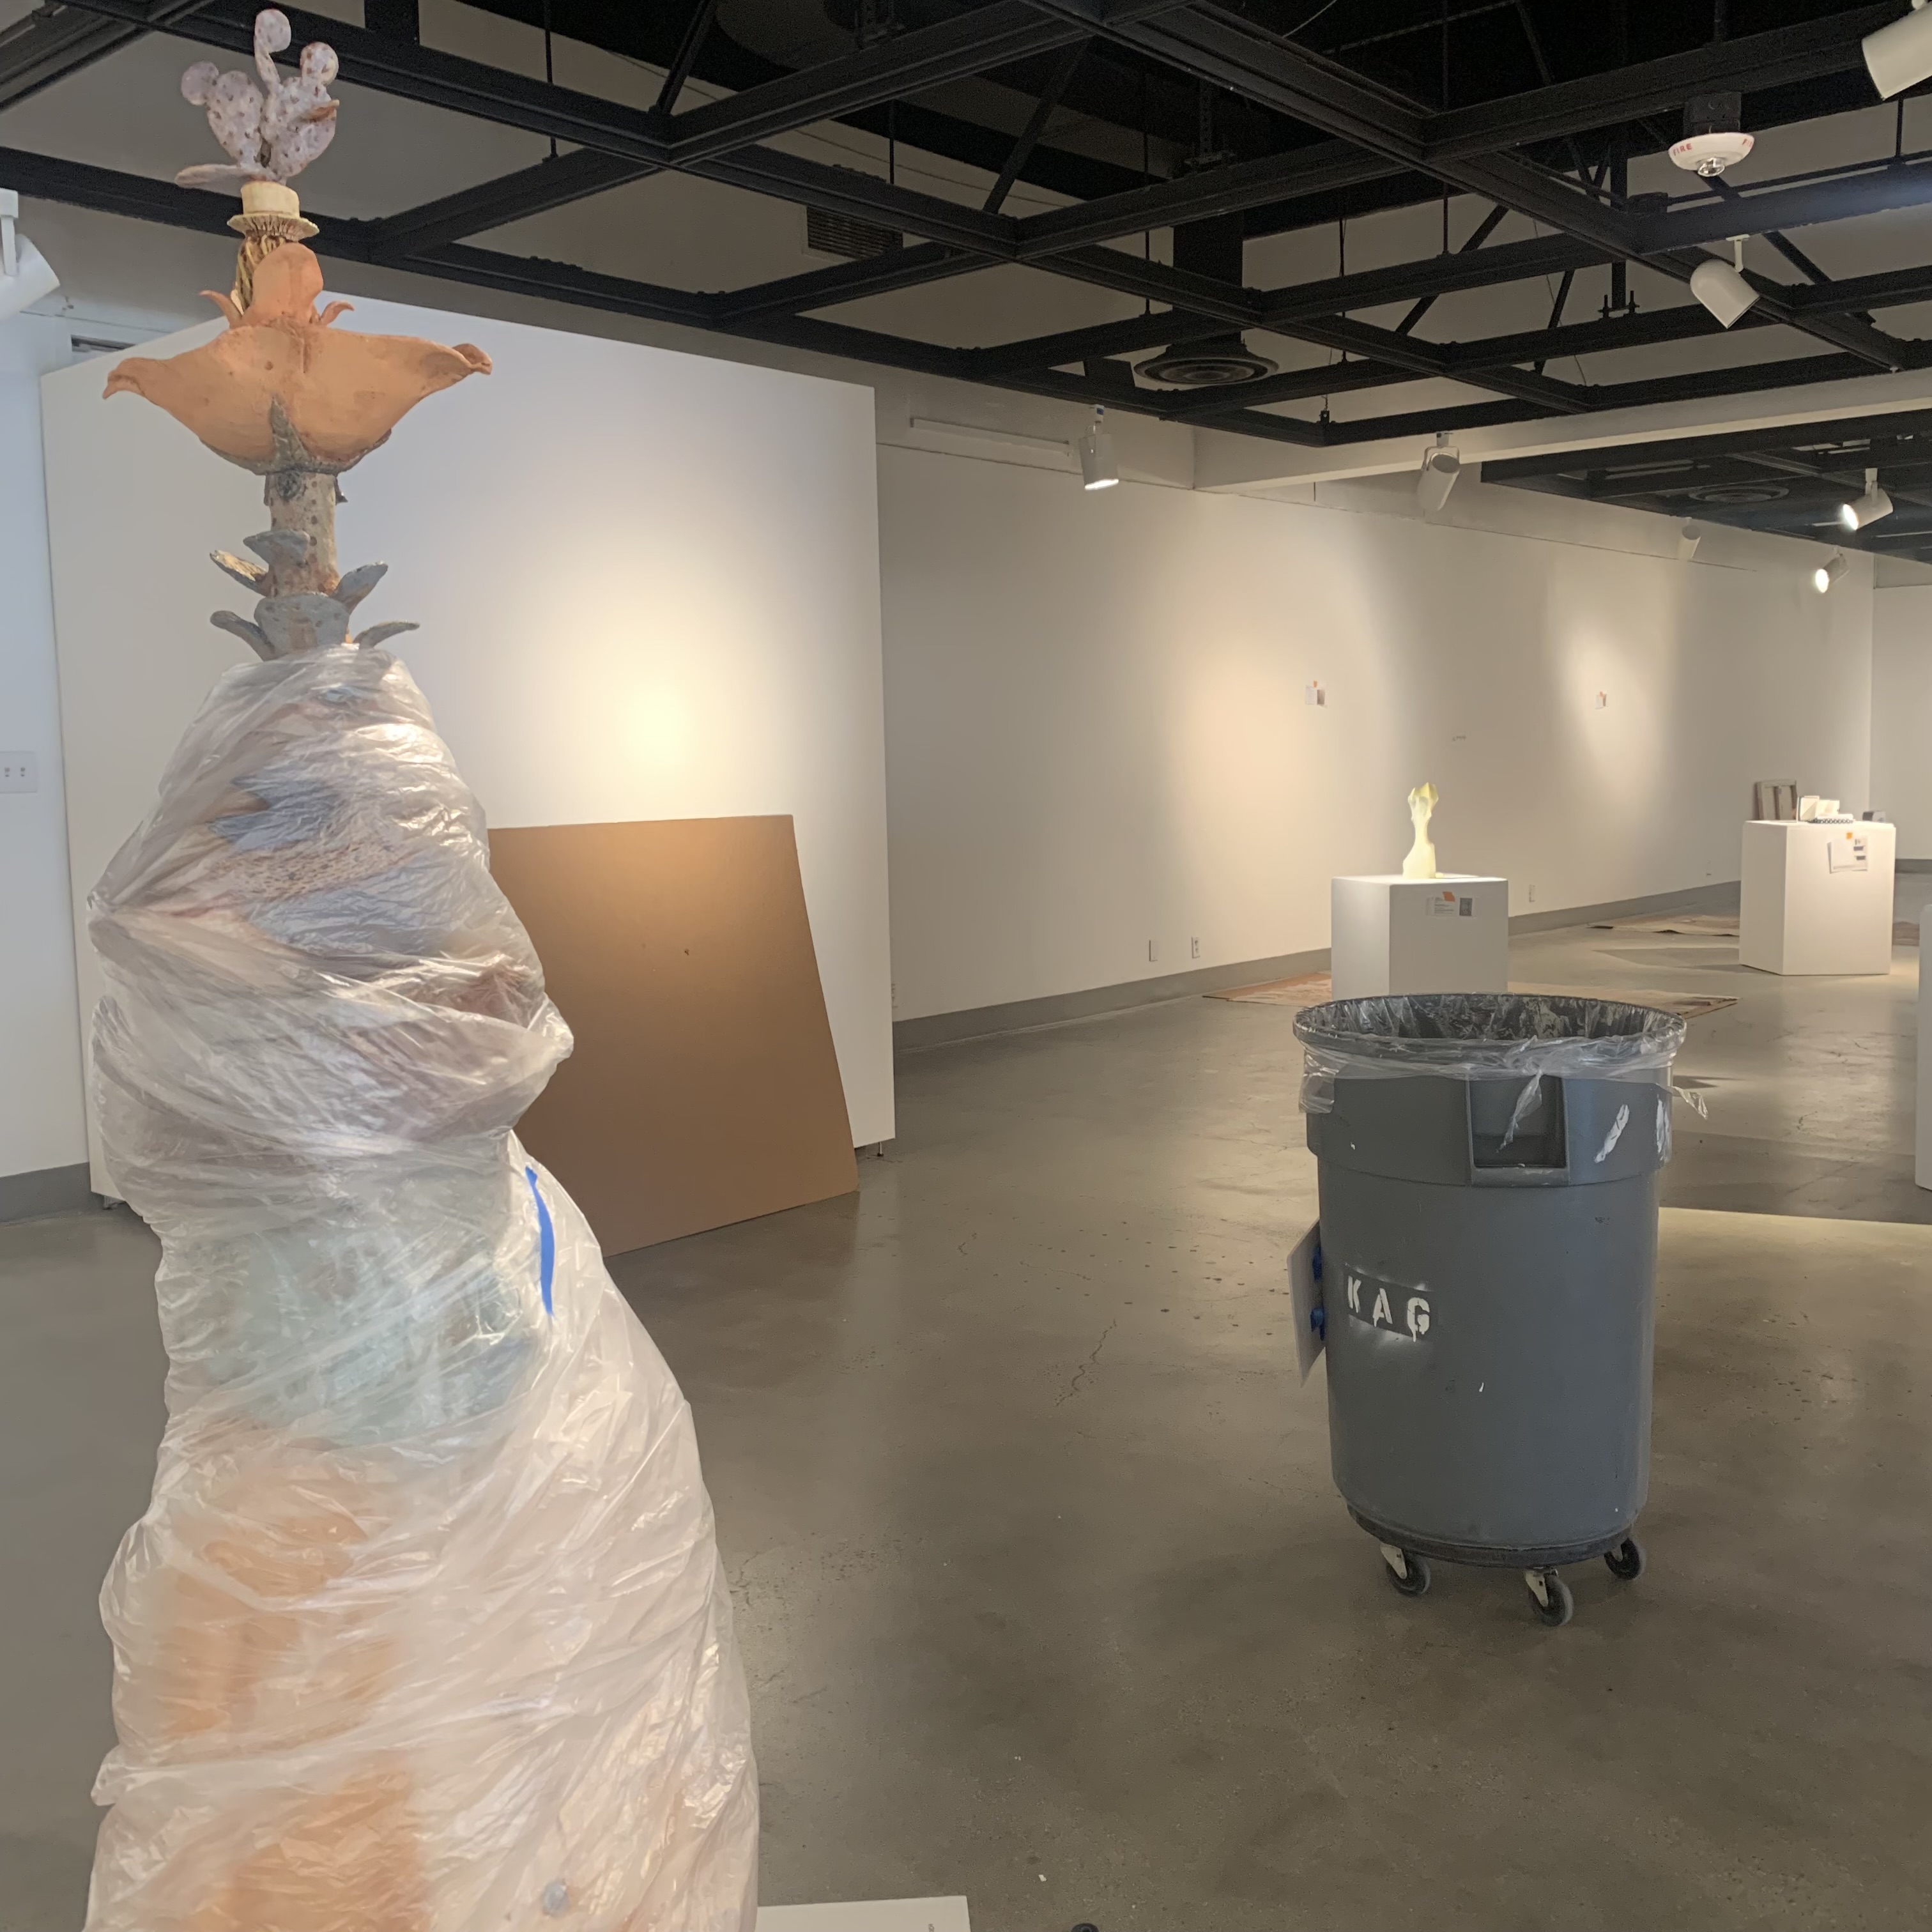 Image of Kellogg art gallery preparing for faculty show